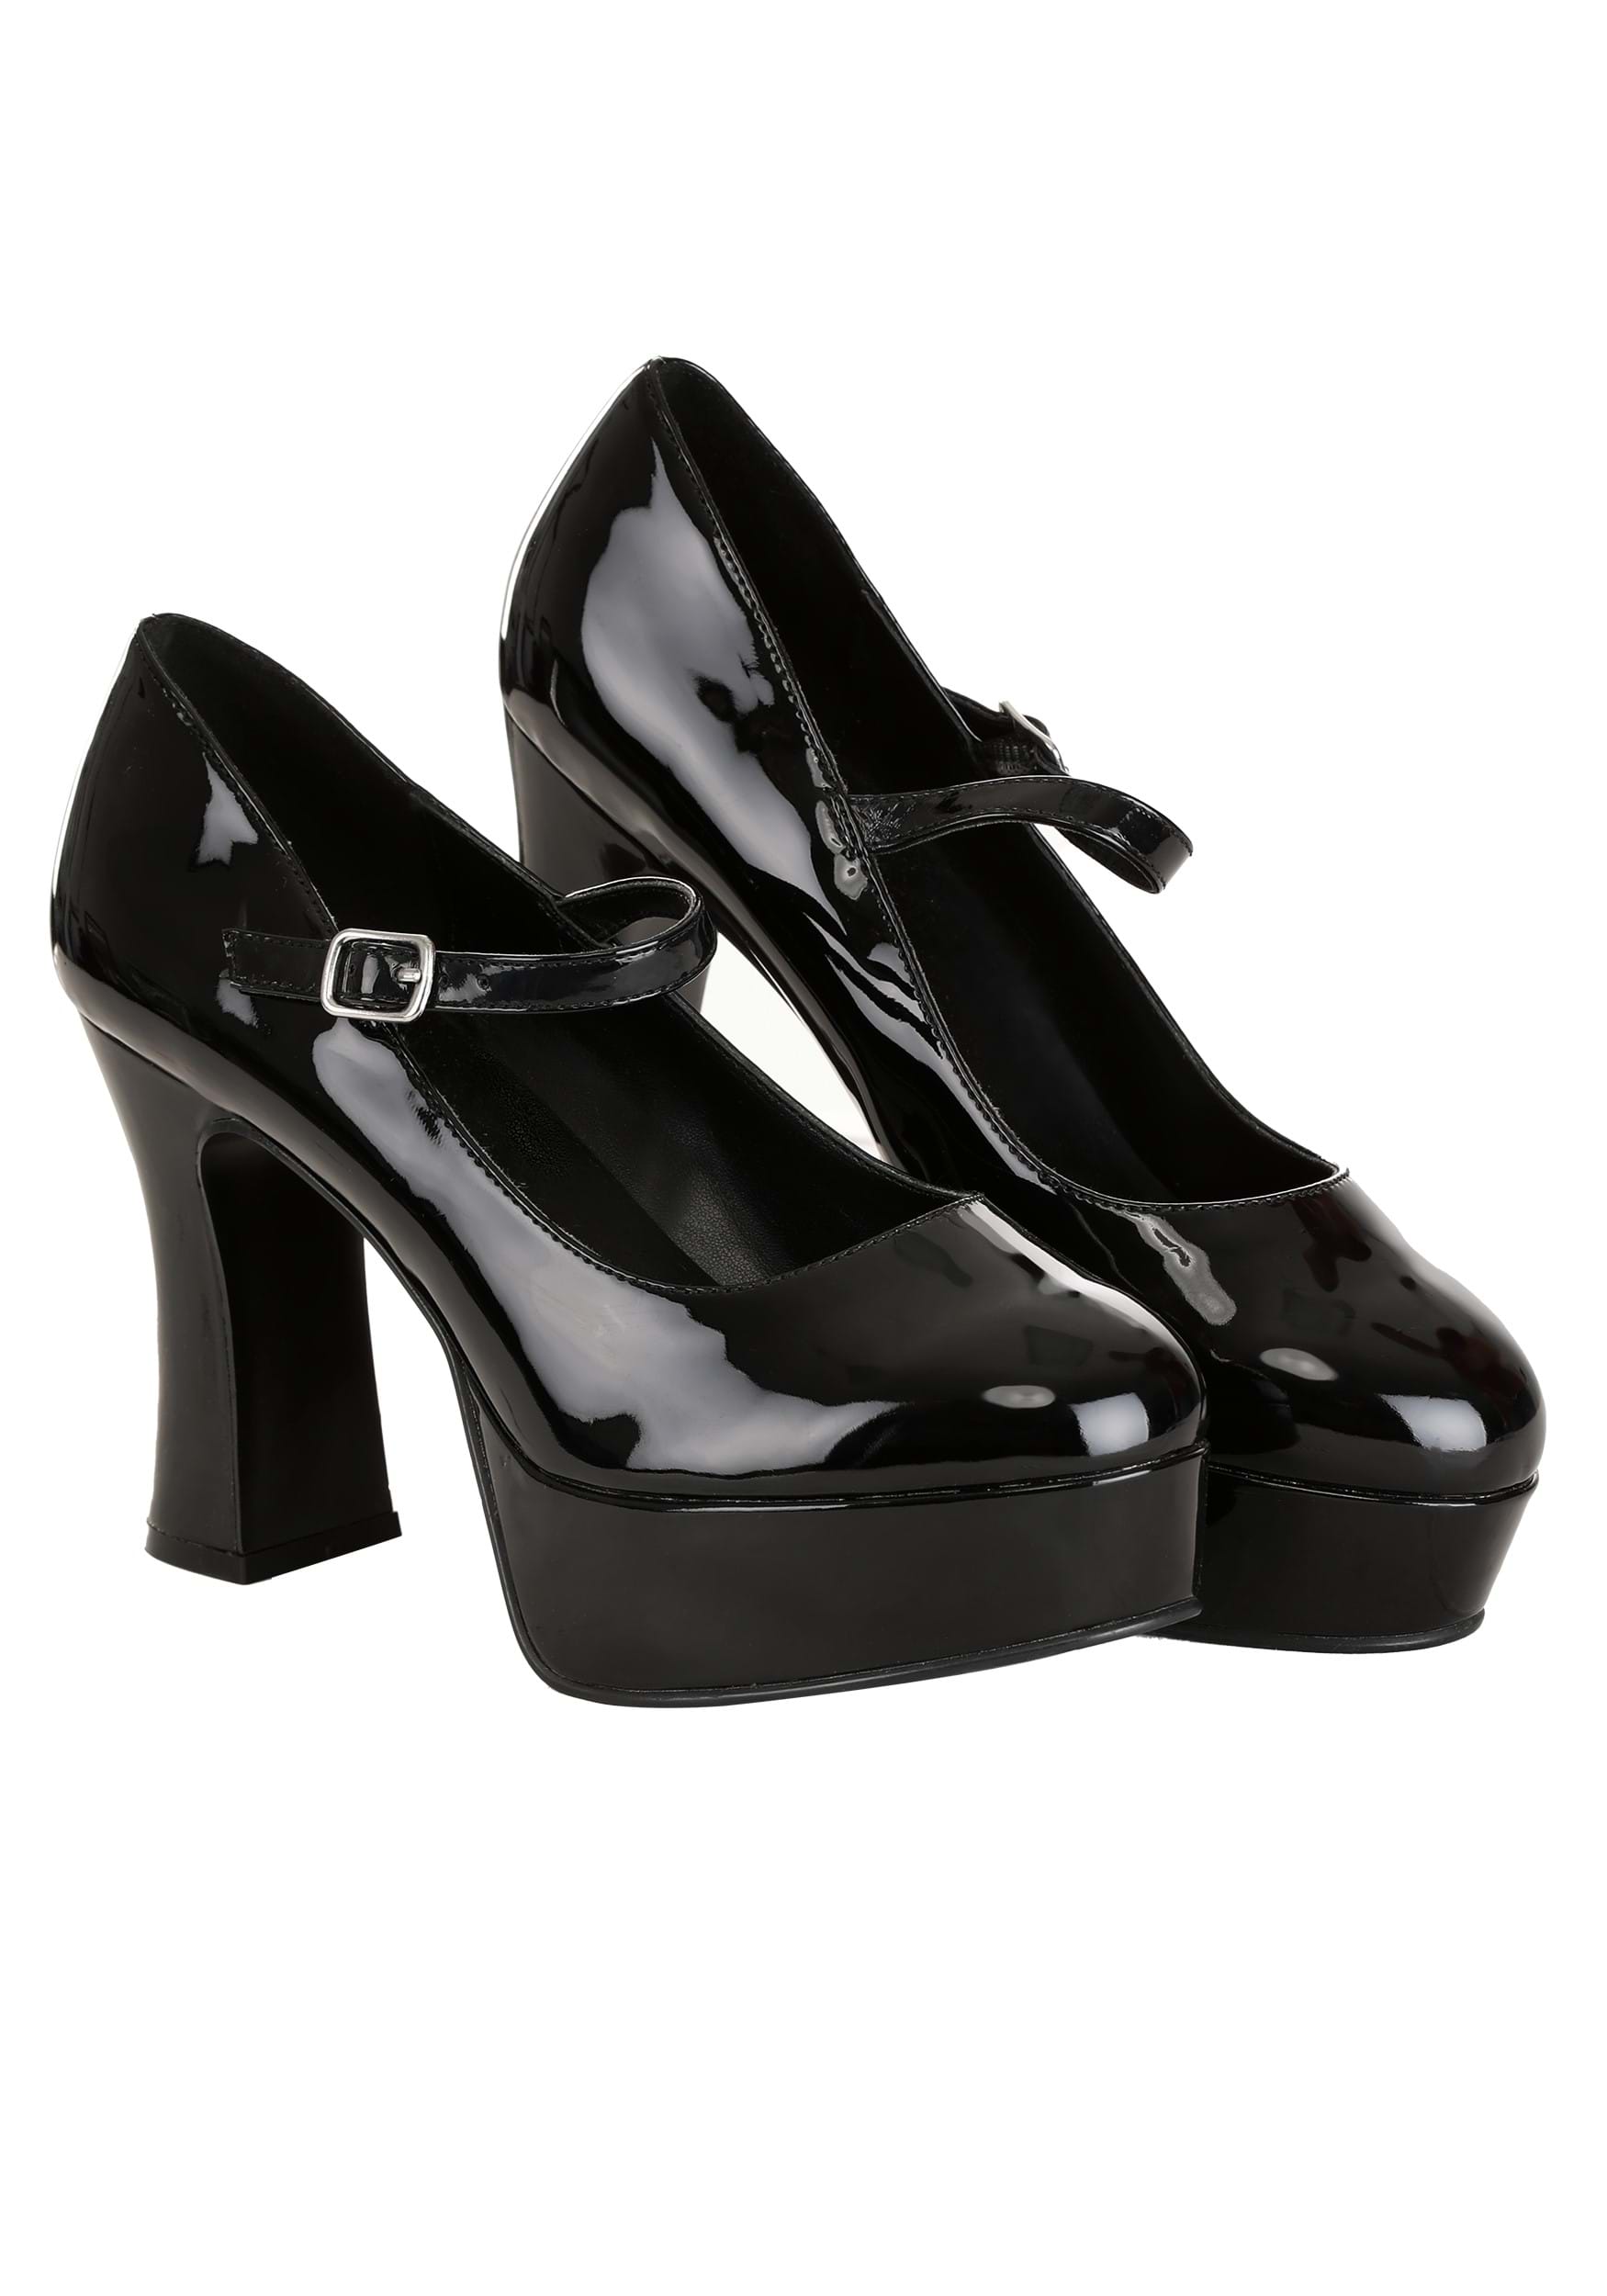 ALICE black patent leather Mary Janes pumps